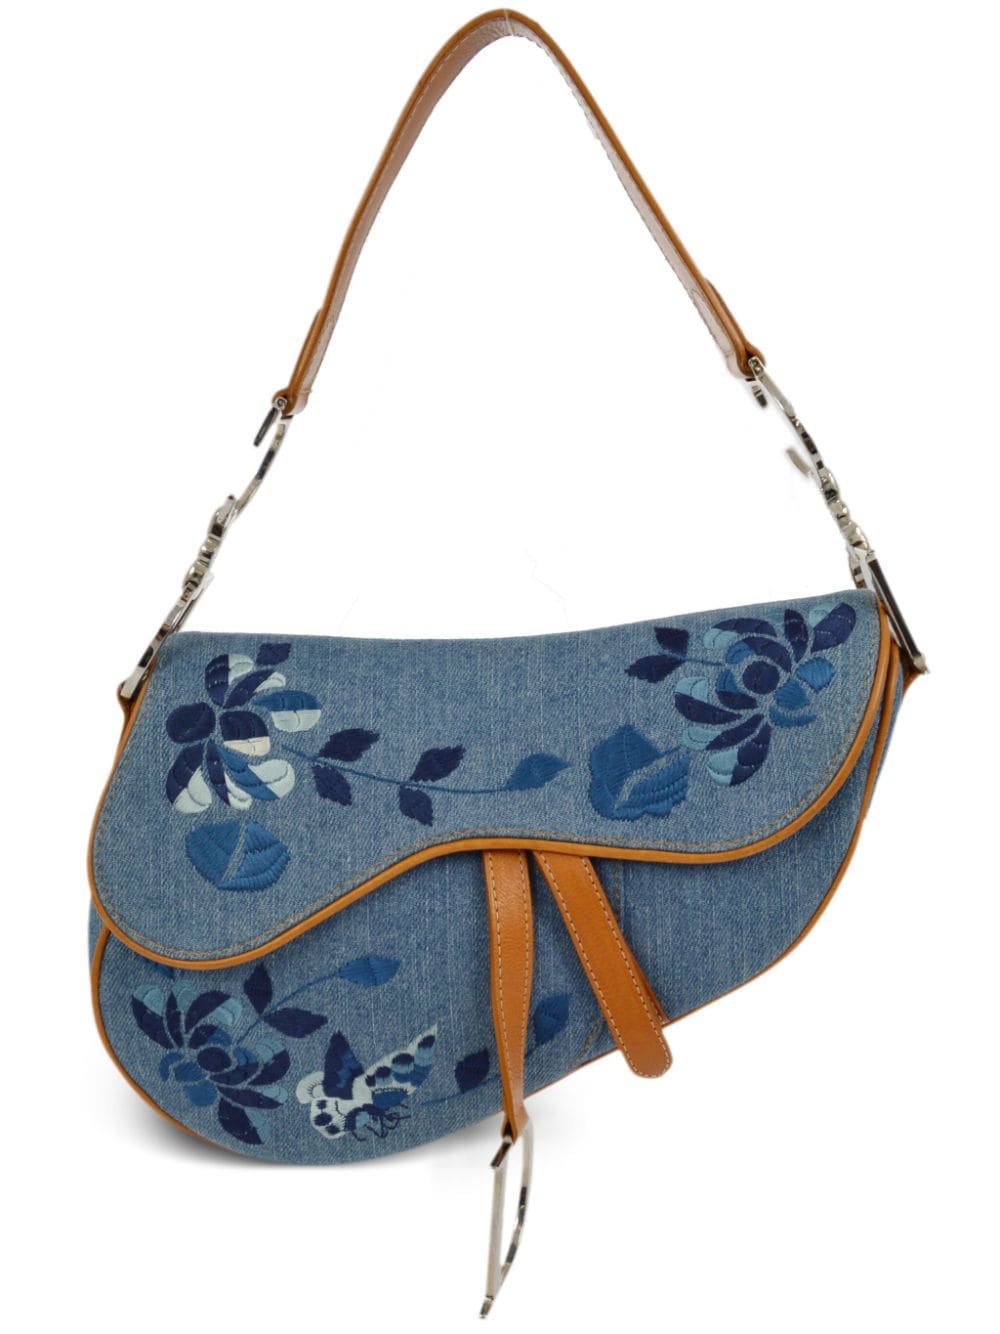 Christian Dior Pre-Owned 2005 Saddle embroidered handbag - Blue von Christian Dior Pre-Owned